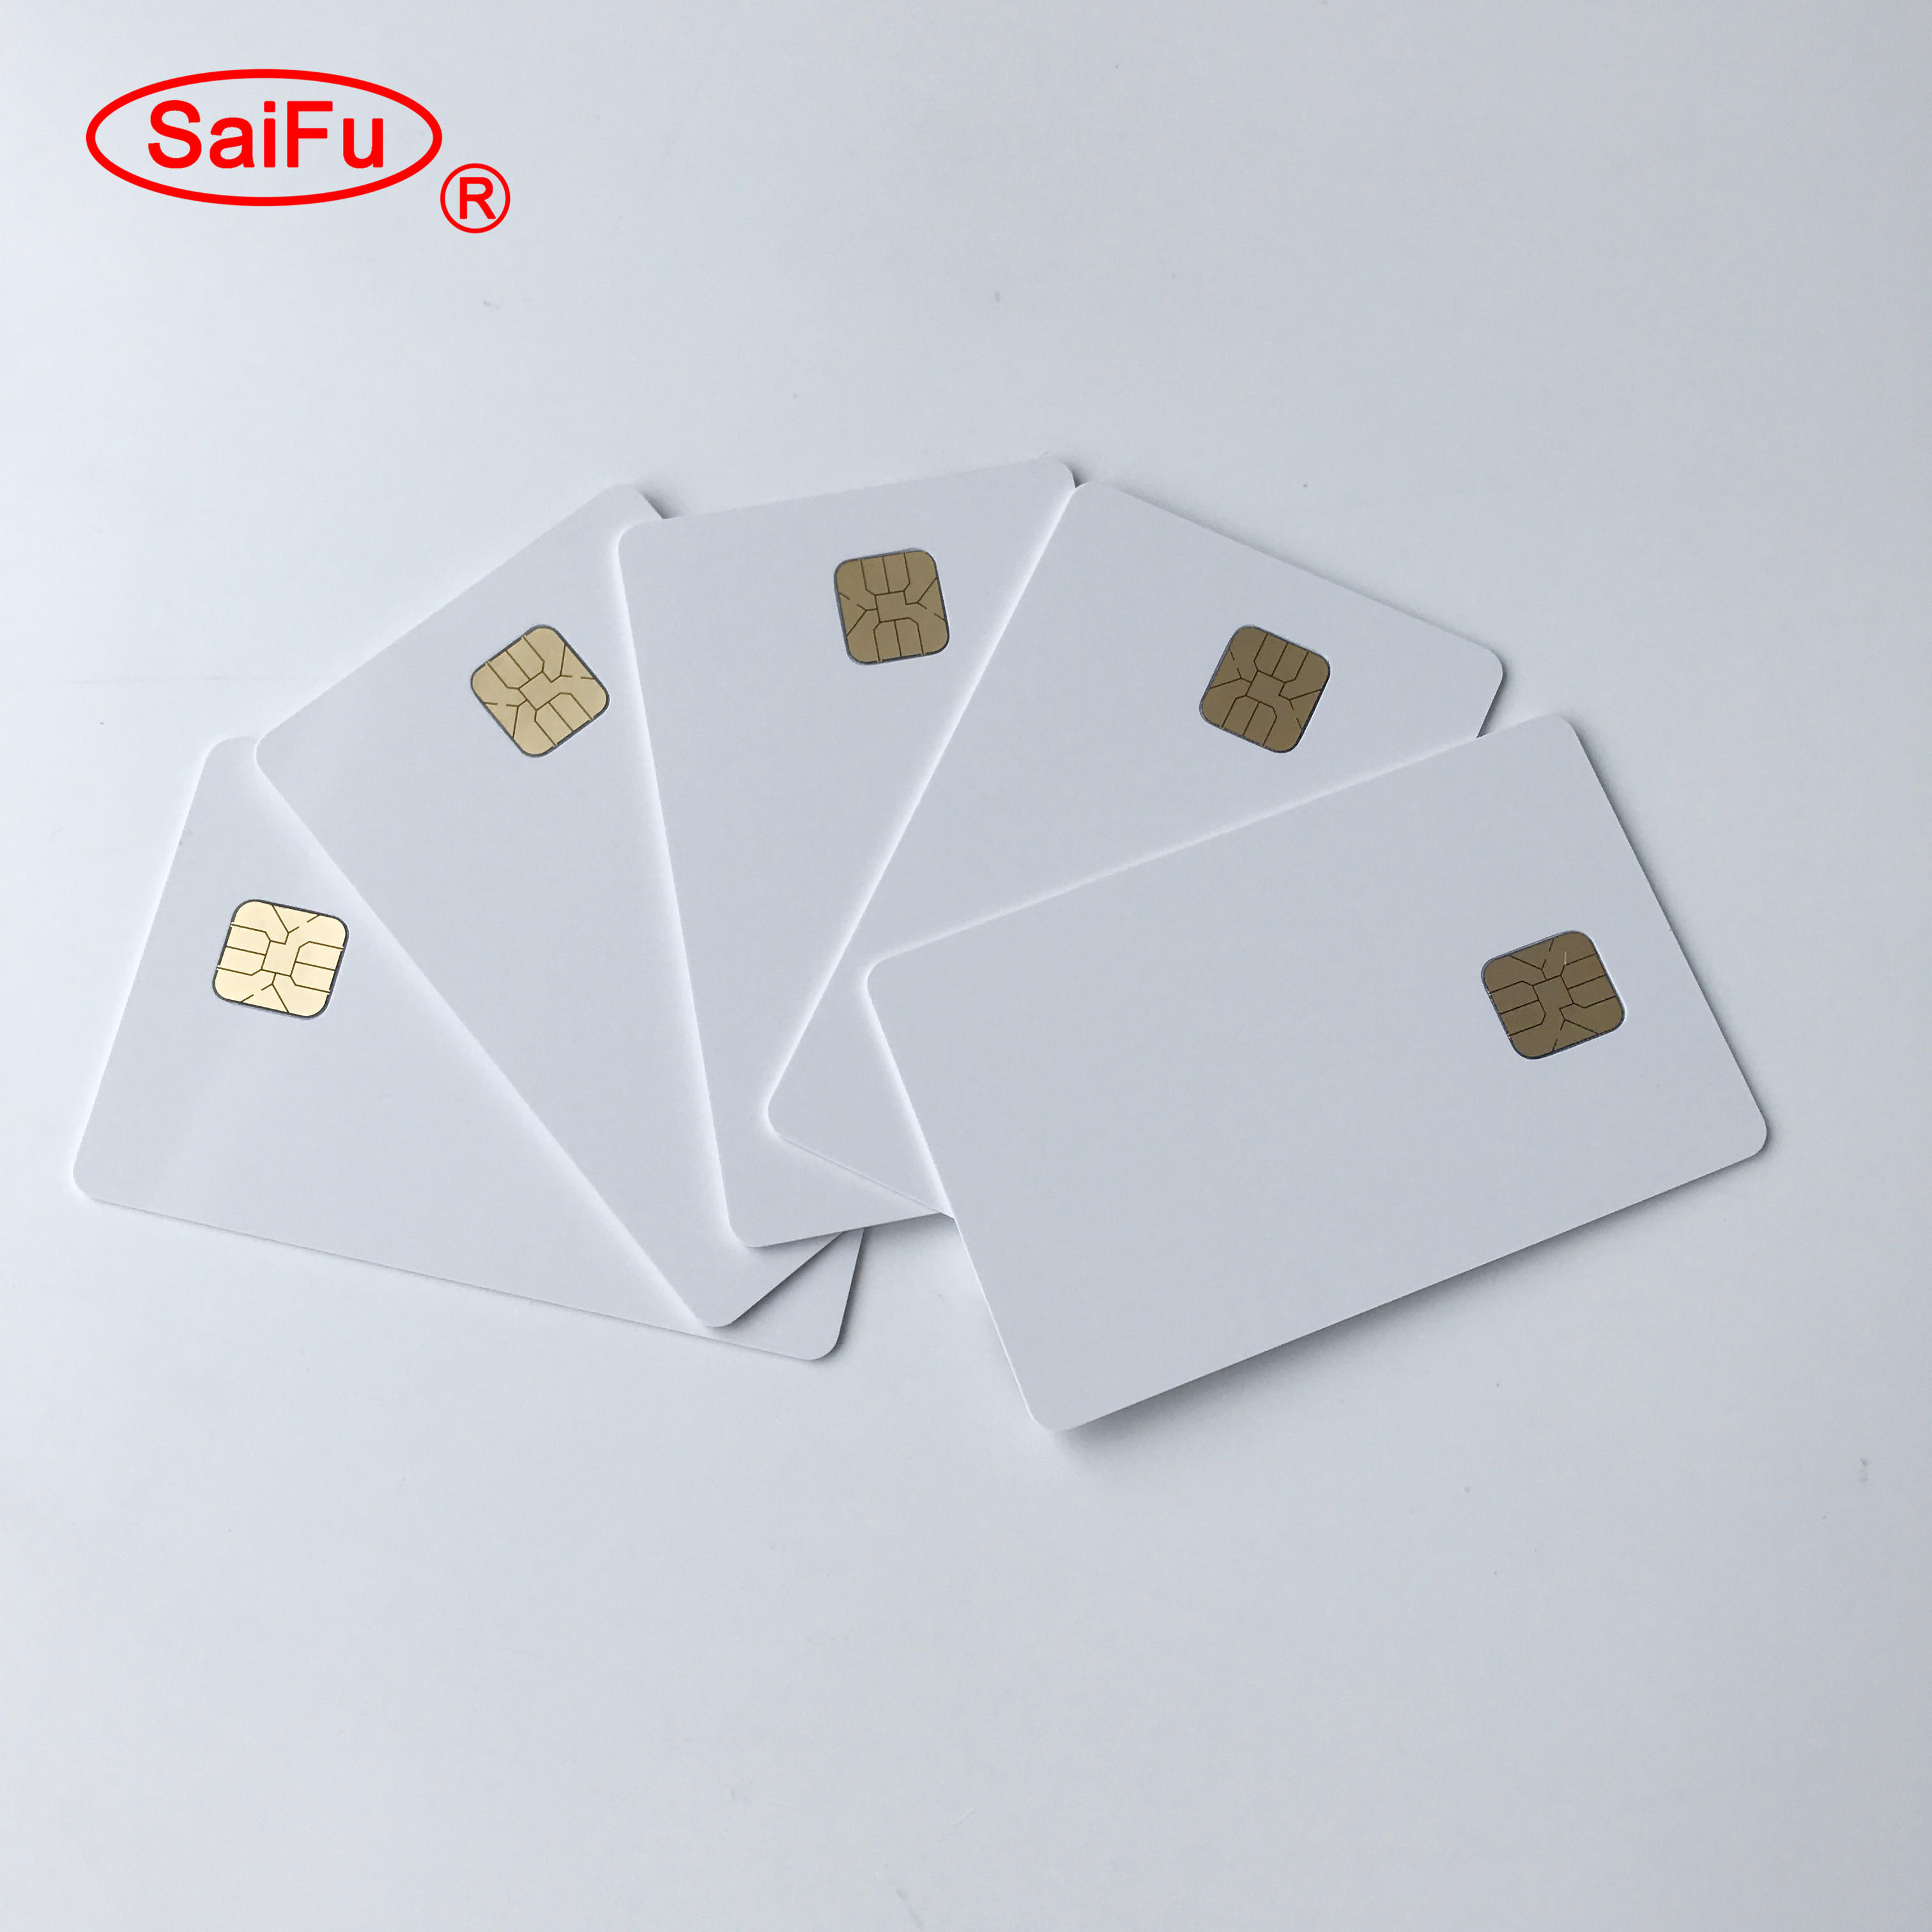 inkjet pvc card could be printable by Epson or Canon printer directly.  inkjet pvc card the normal dye ink and pigment ink.